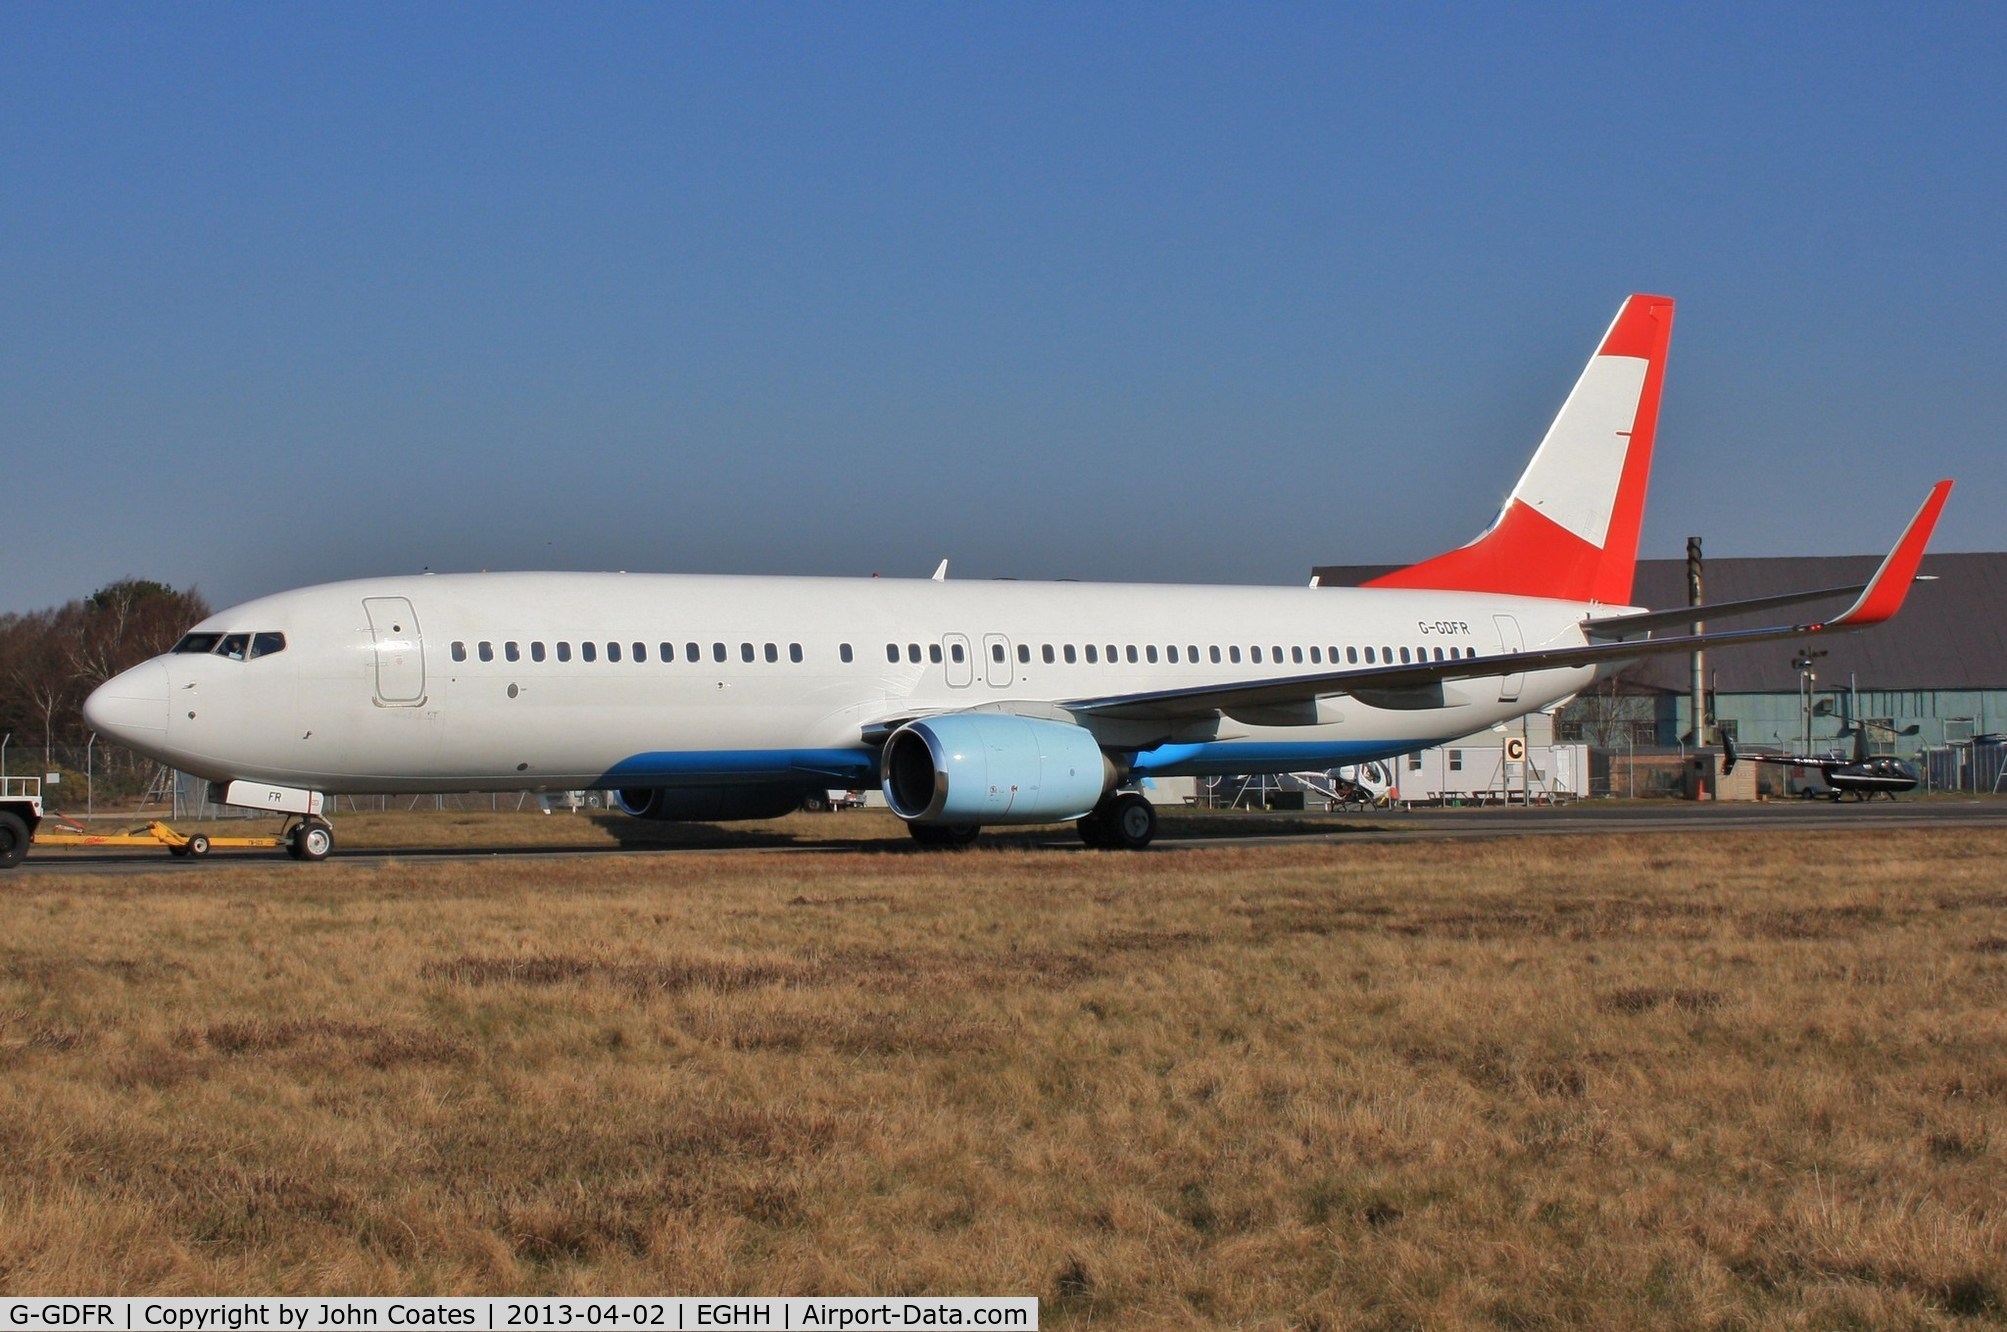 G-GDFR, 2003 Boeing 737-8Z9 C/N 30421, ex OE-LNQ being towed to paintshop for respray to Jet 2 livery